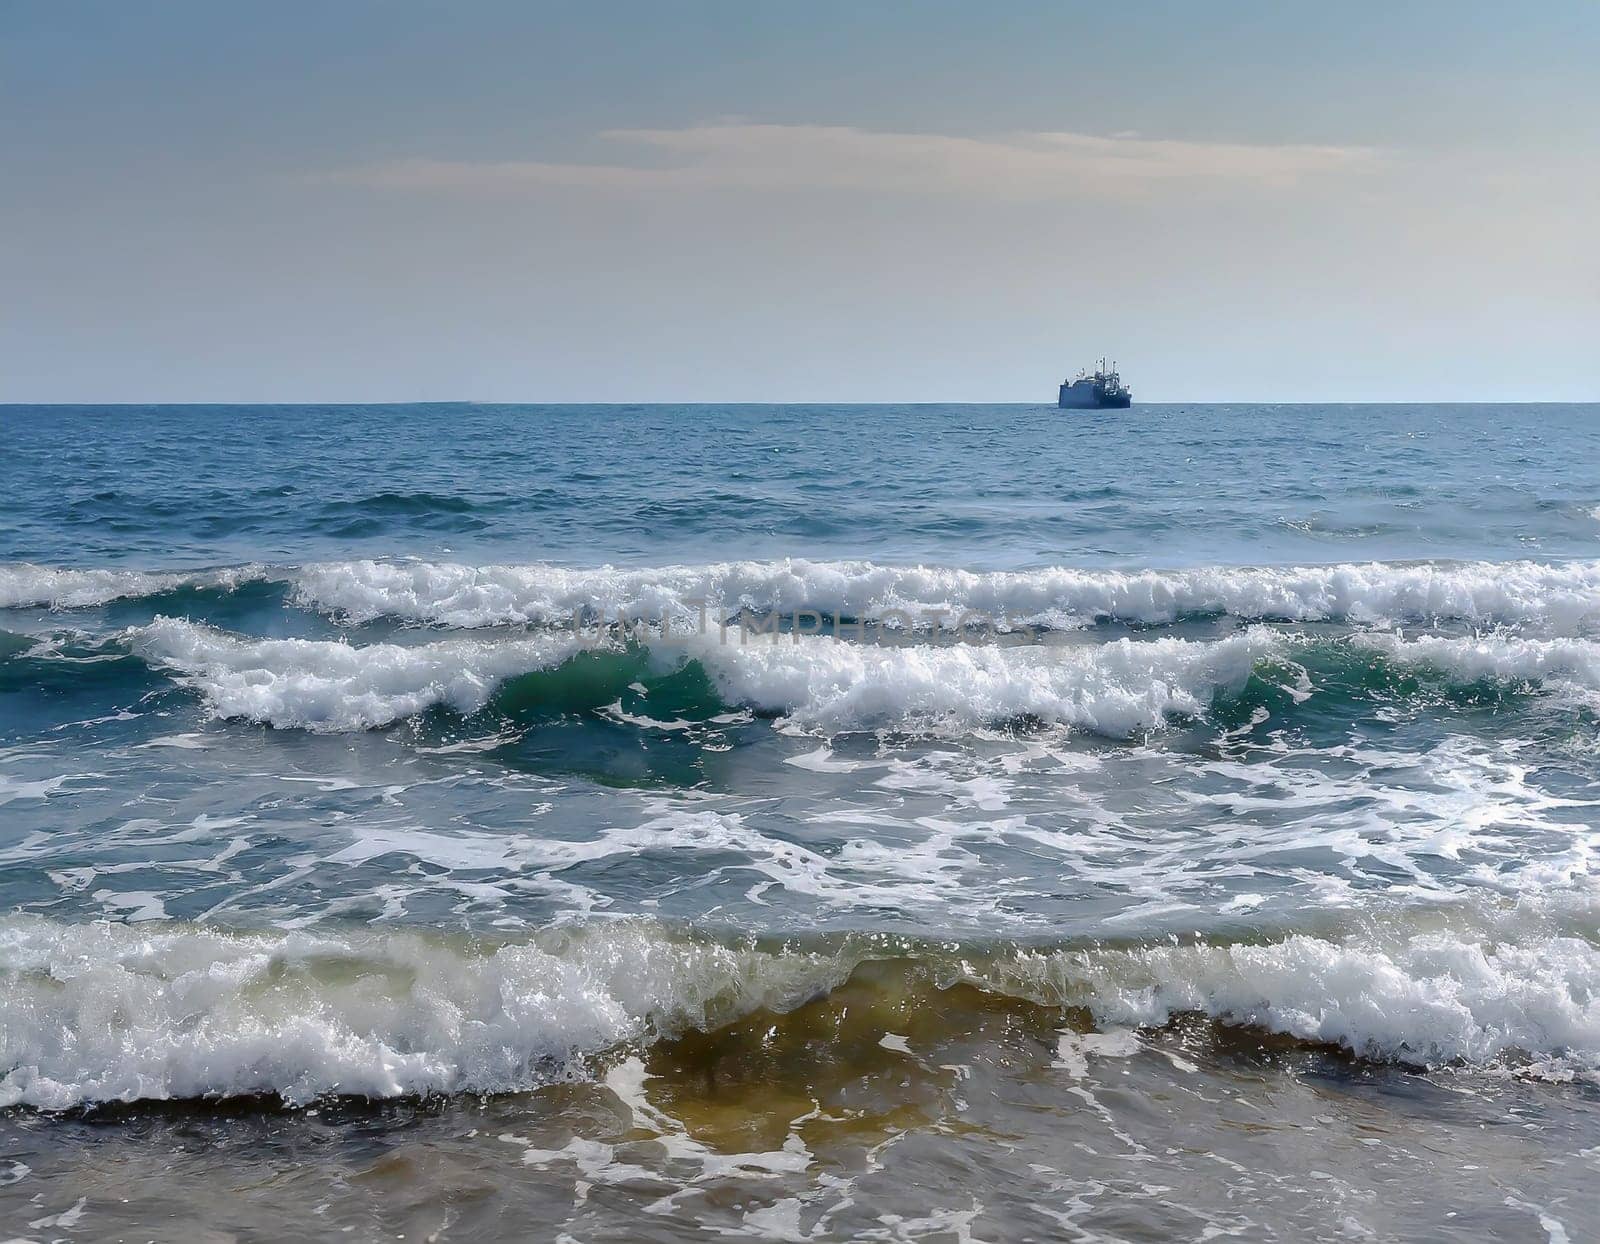 three waves near the shore. a blurred ship on the horizon. Sea waves, water tide. sea ​​view. the waves are approaching the shore